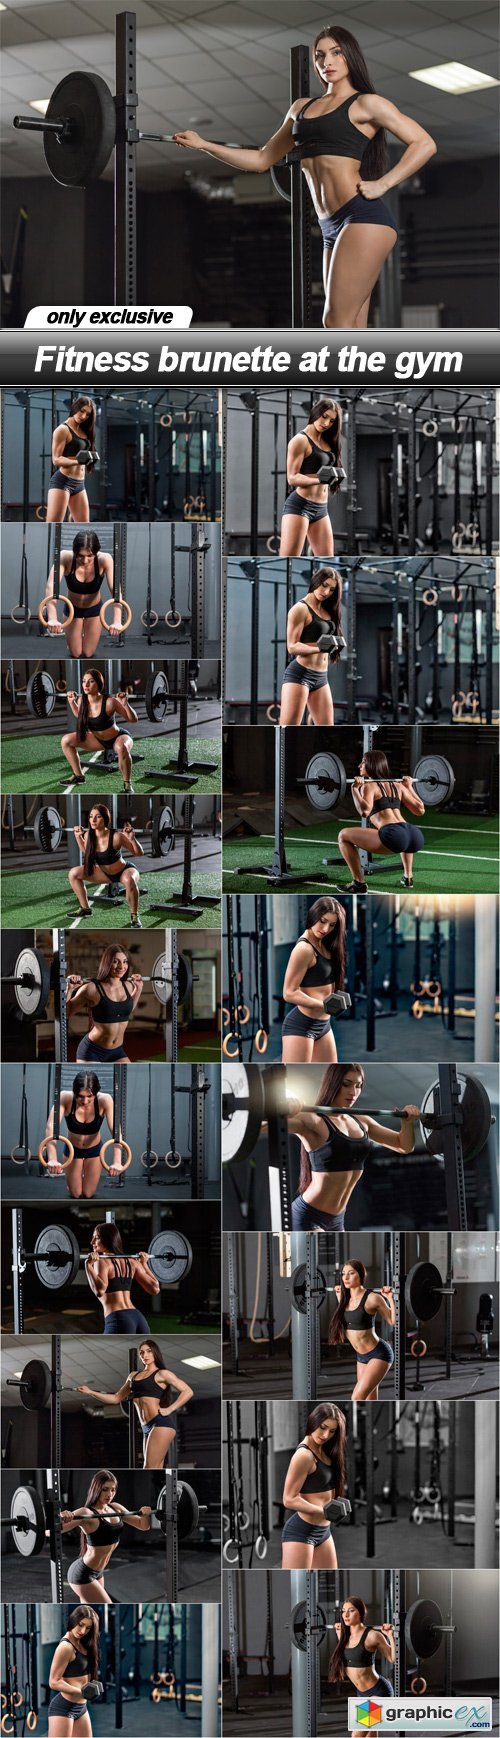 Fitness brunette at the gym - 18 UHQ JPEG